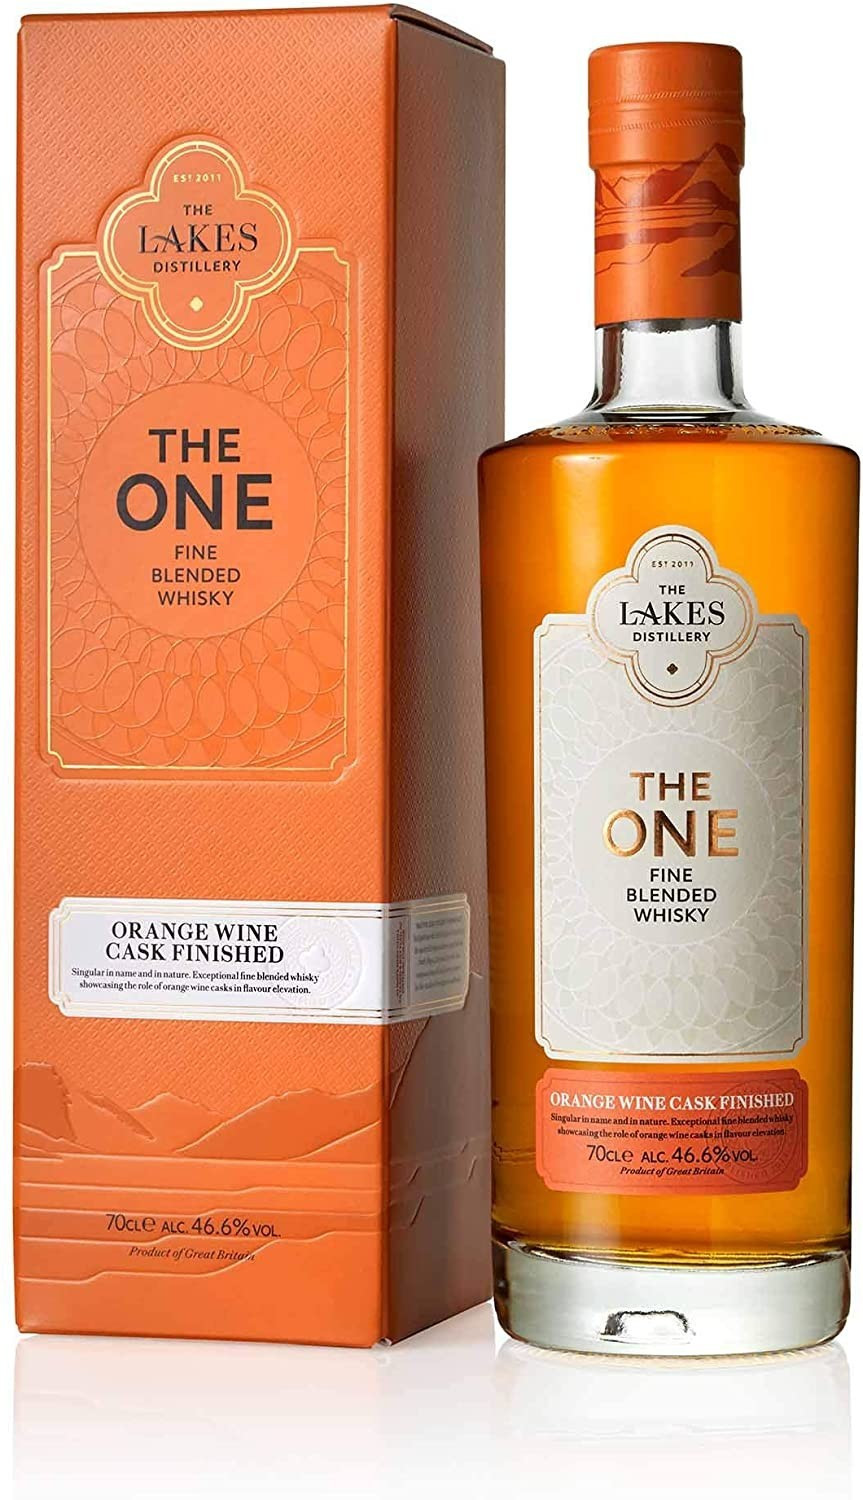 The Lakes Distillery The One Orange Wine Cask Finished Whisky 0,7l 46,6%